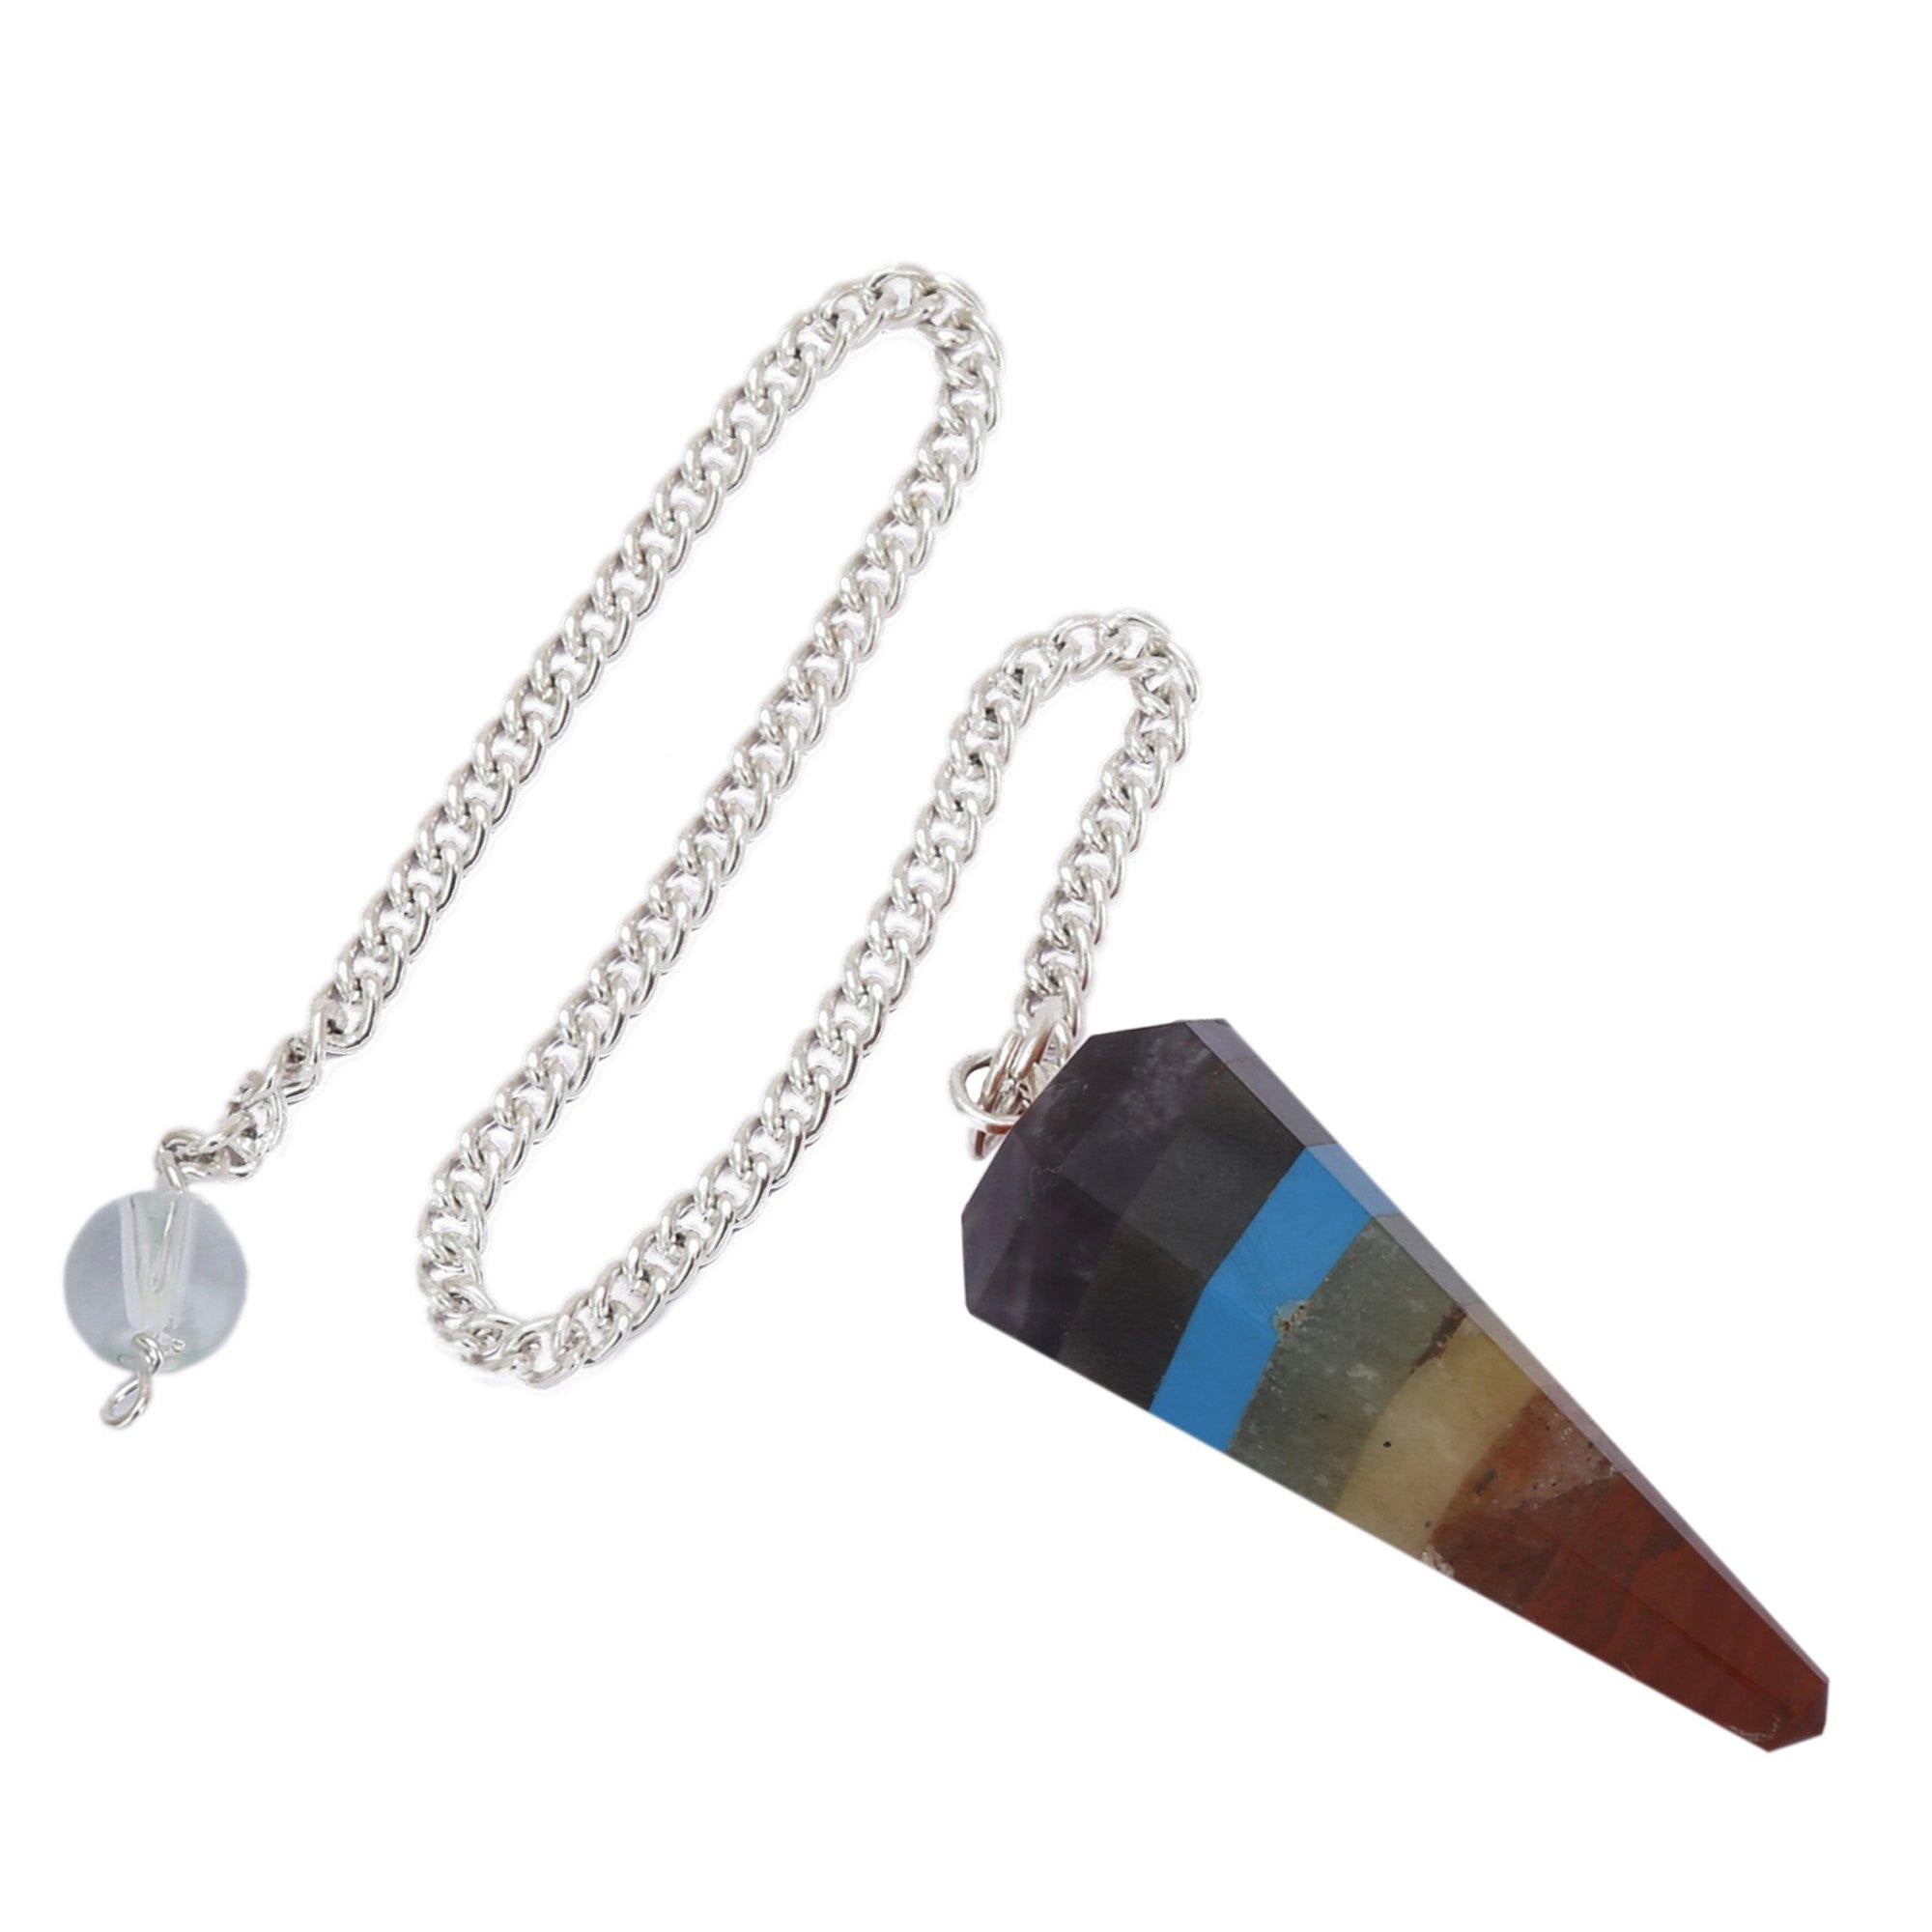 Healing Crystals - Wholesale Seven Chakra 6 Faceted Pendulum